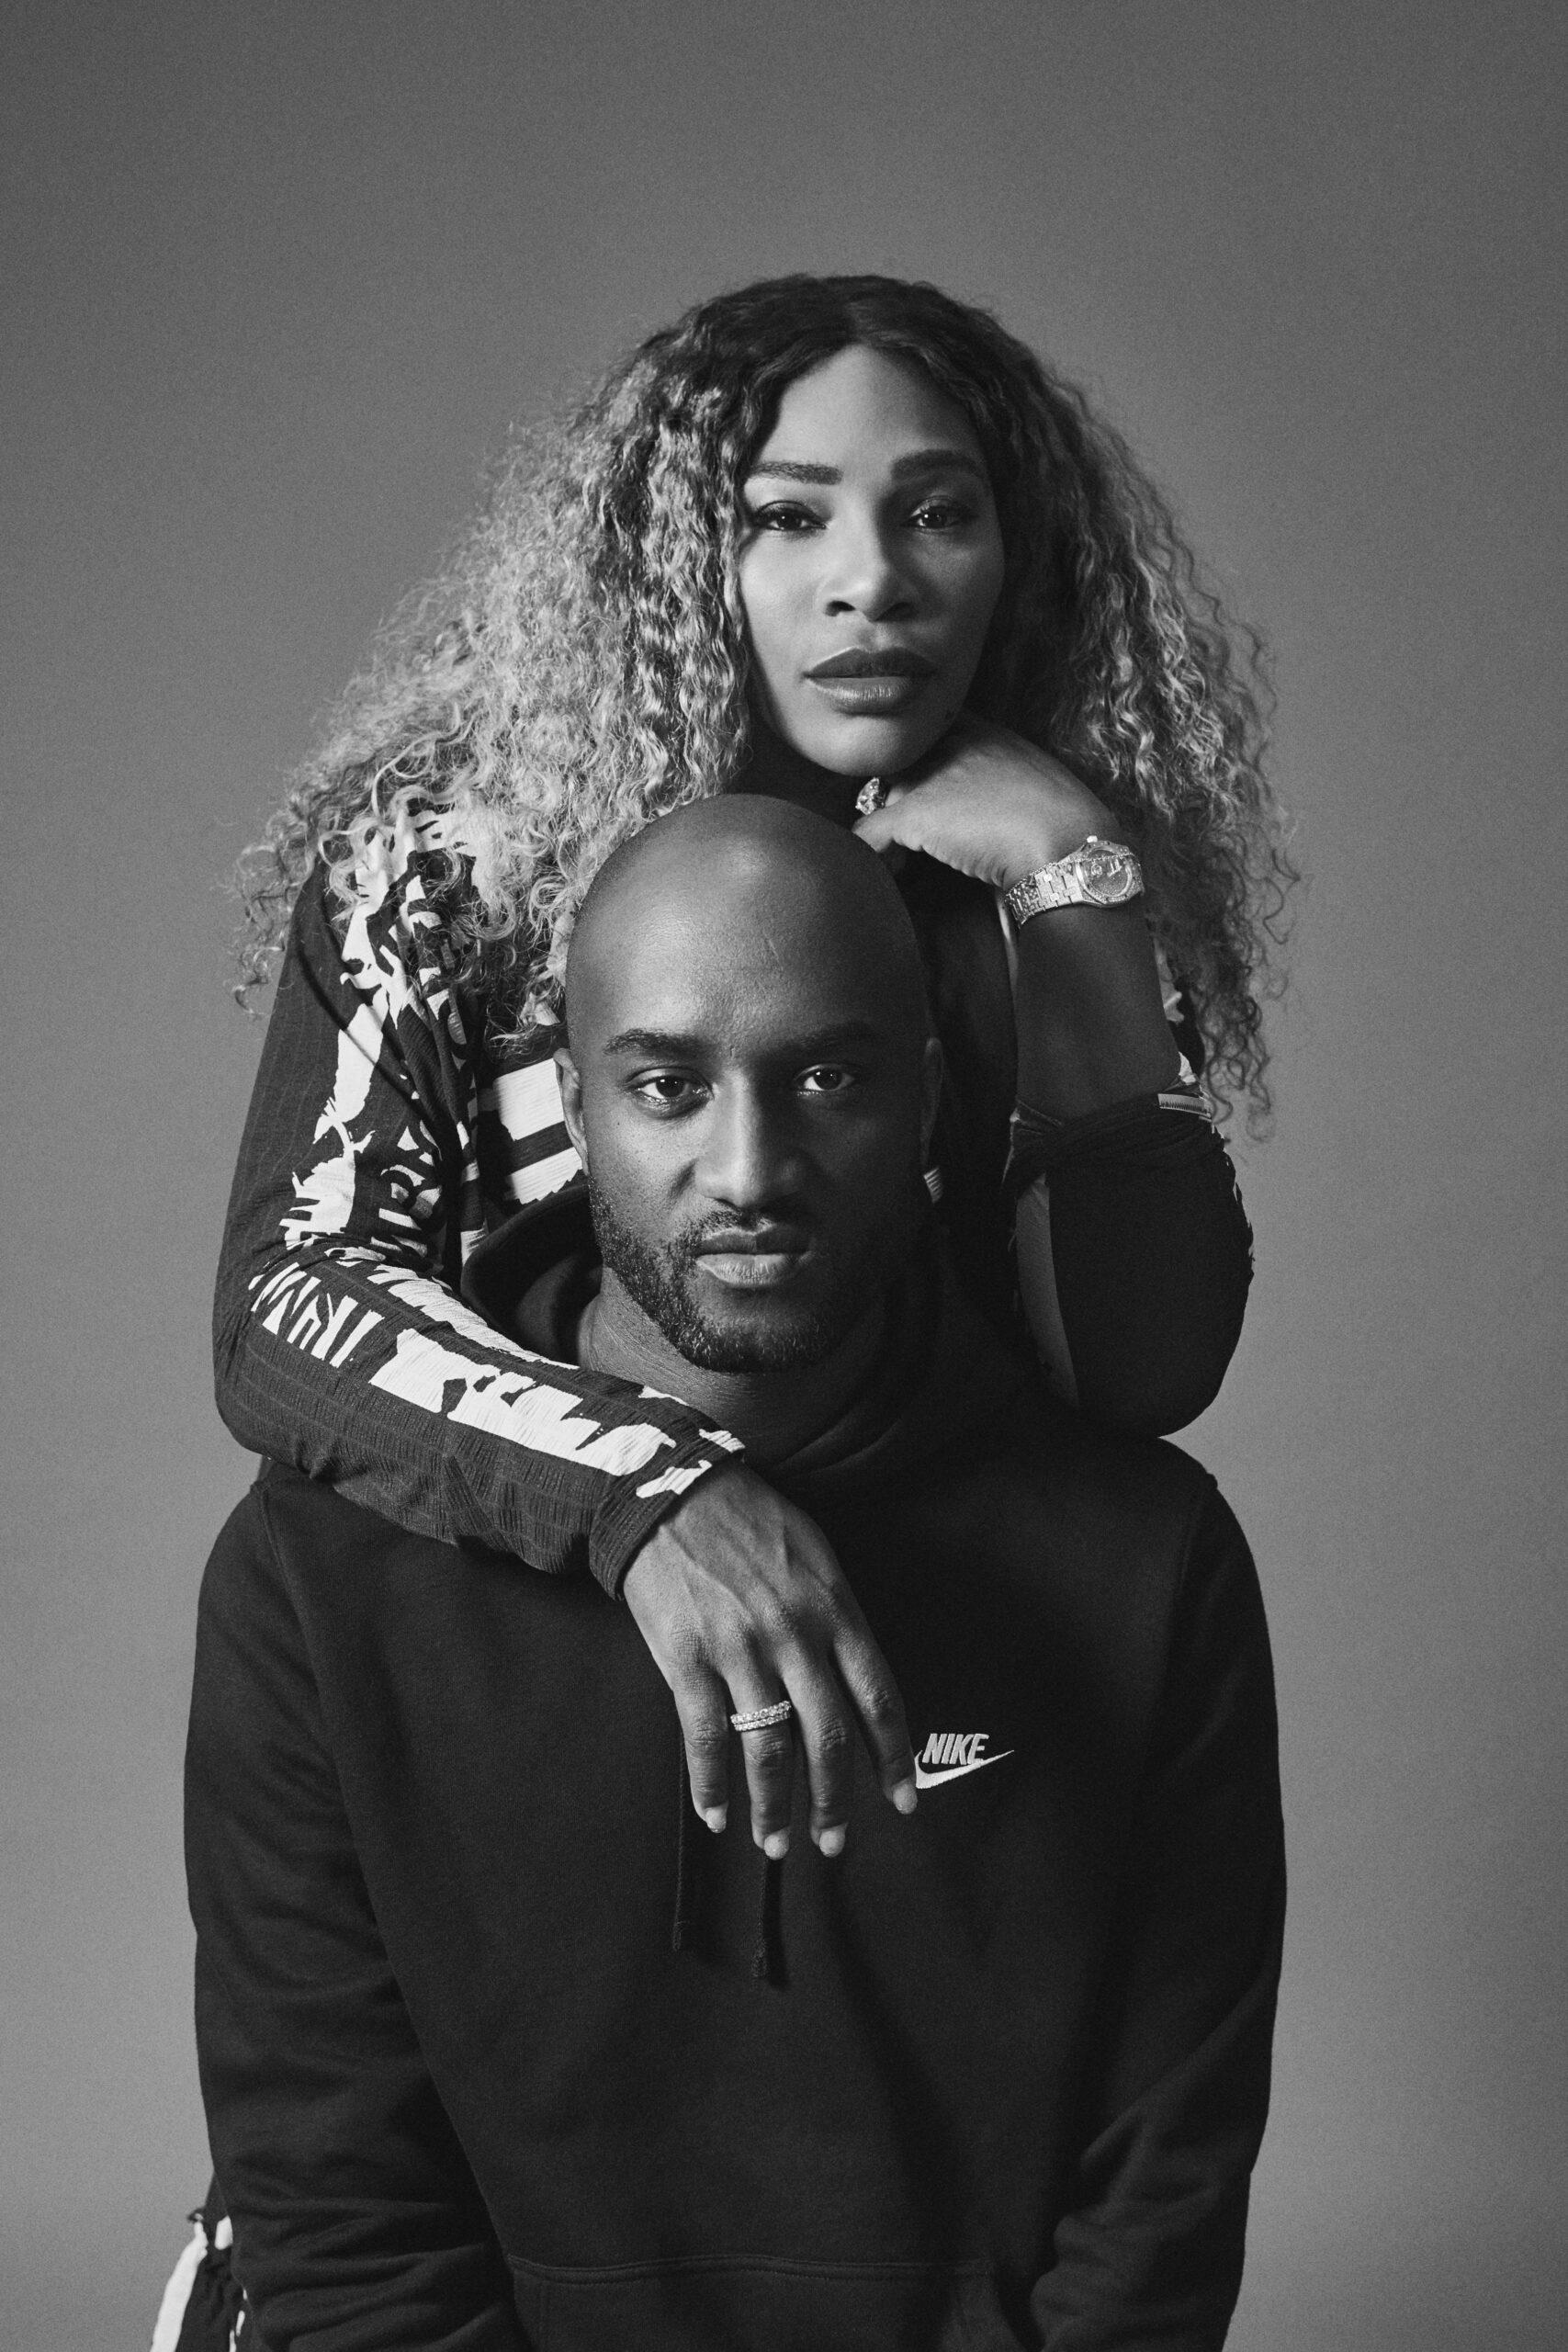 Virgil Abloh's Widow Steps Into New Role, 'I Have To Stay On This